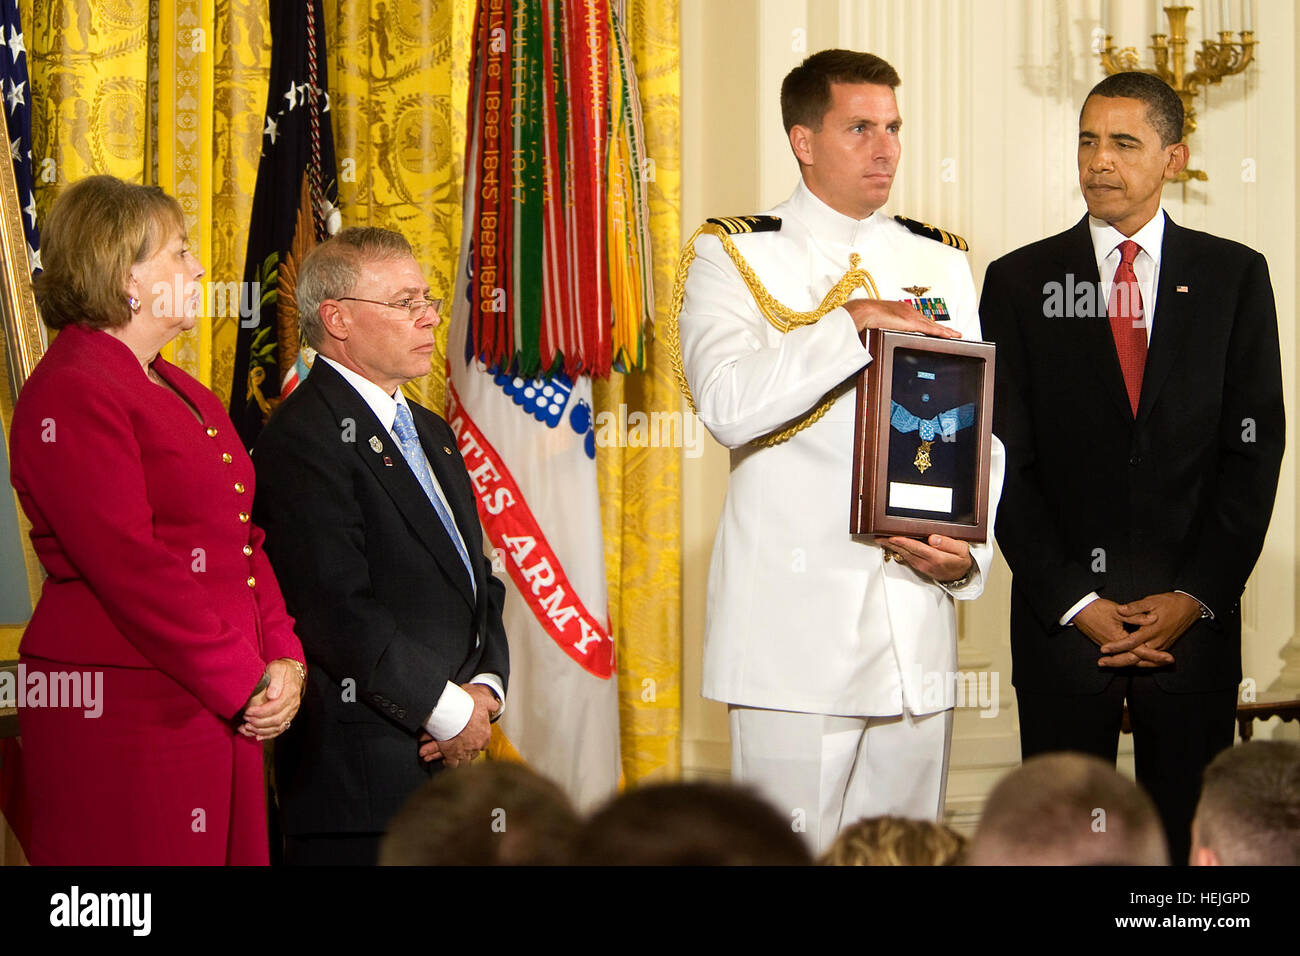 President Barack Obama posthumously awards Army Sgt. 1st. Class Jared C. Monti from Raynham, Mass., the Medal of Honor to his parents Paul and Janet Monti Sept. 17, 2009, in the East Room of the White House in Washington D.C..  ÒJared Monti saw danger before him and he went out to meet it,Ó President Obama said in the ceremony.  Army photo by D. Myles Cullen (released) US Army 51325 President Barack Obama posthumously awards Army Sgt. 1st. Class Jared C. Monti from Raynham, Mass., the Medal of Honor to his parents, Paul and Janet Monti, in the East Room of the White House in Wash Stock Photo